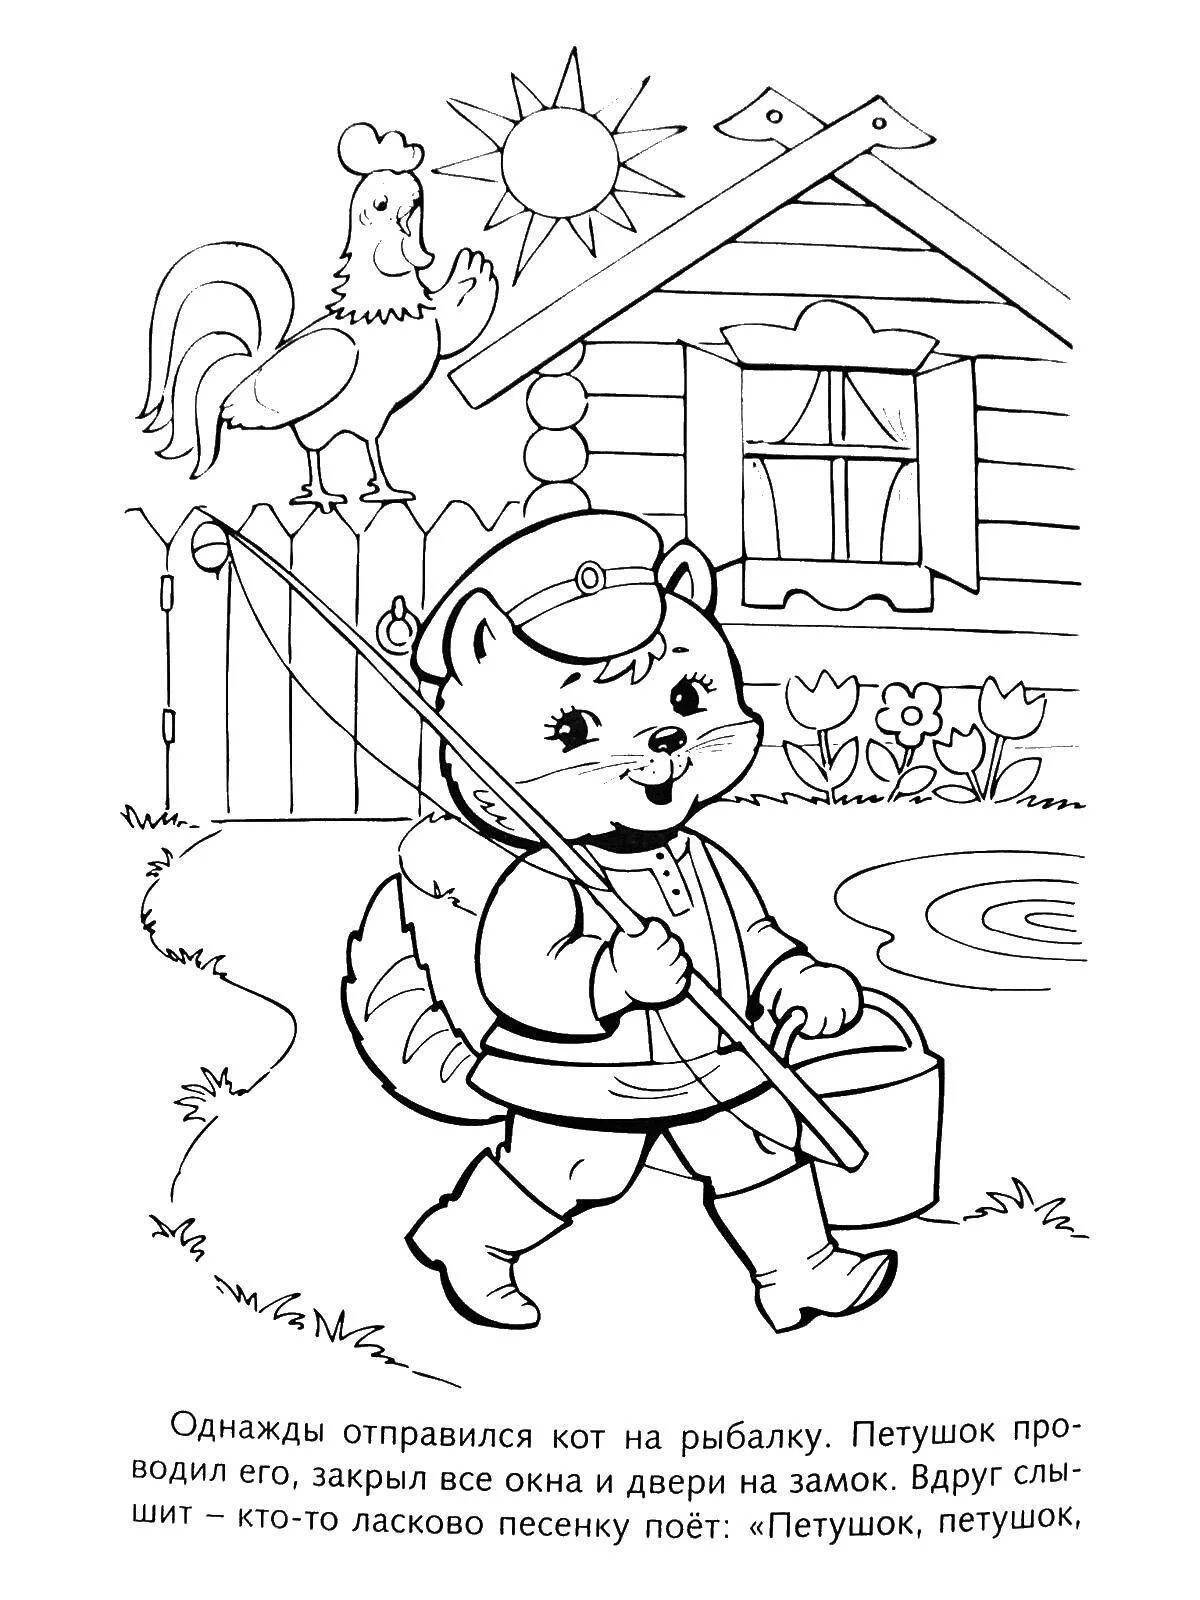 Adorable cat and fox coloring book